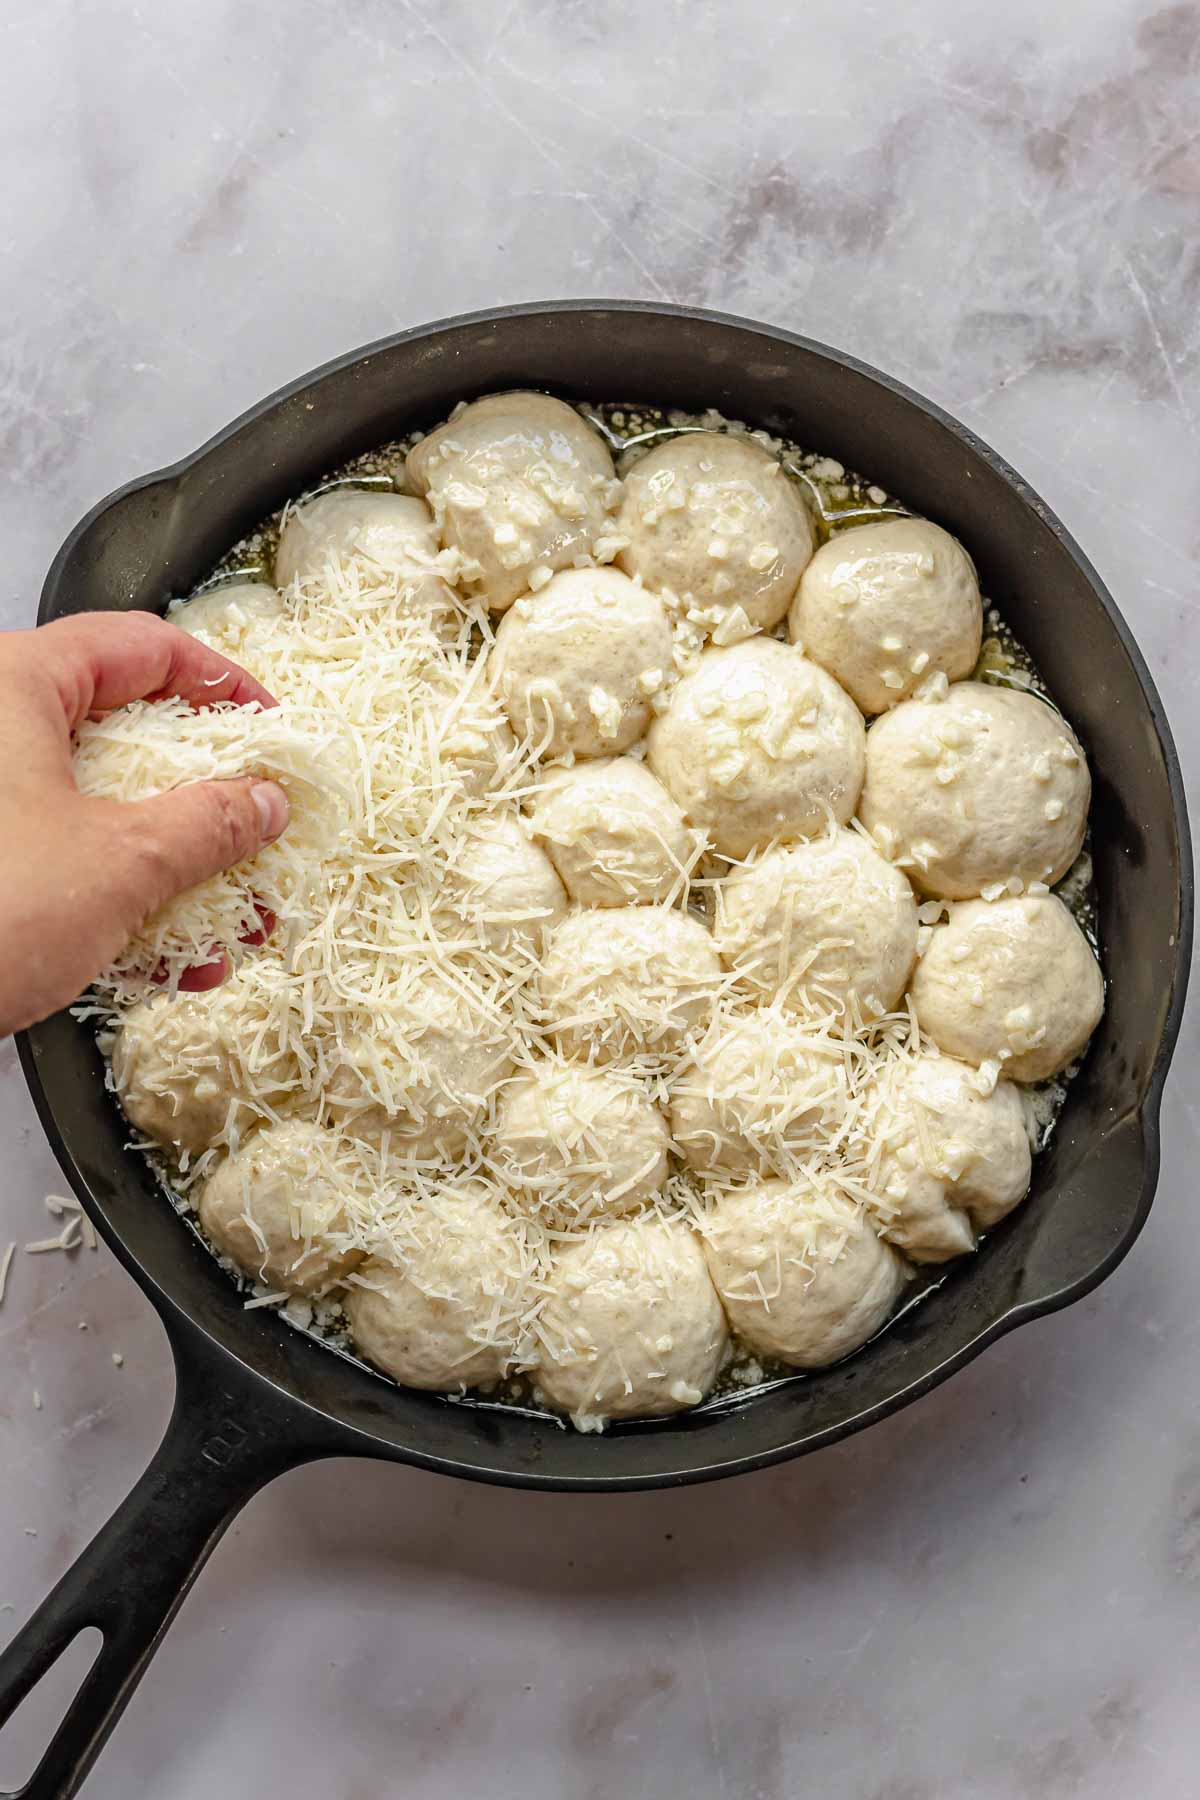 A hand scatters shredded parmesan cheese on top of pre-baked bread bites.